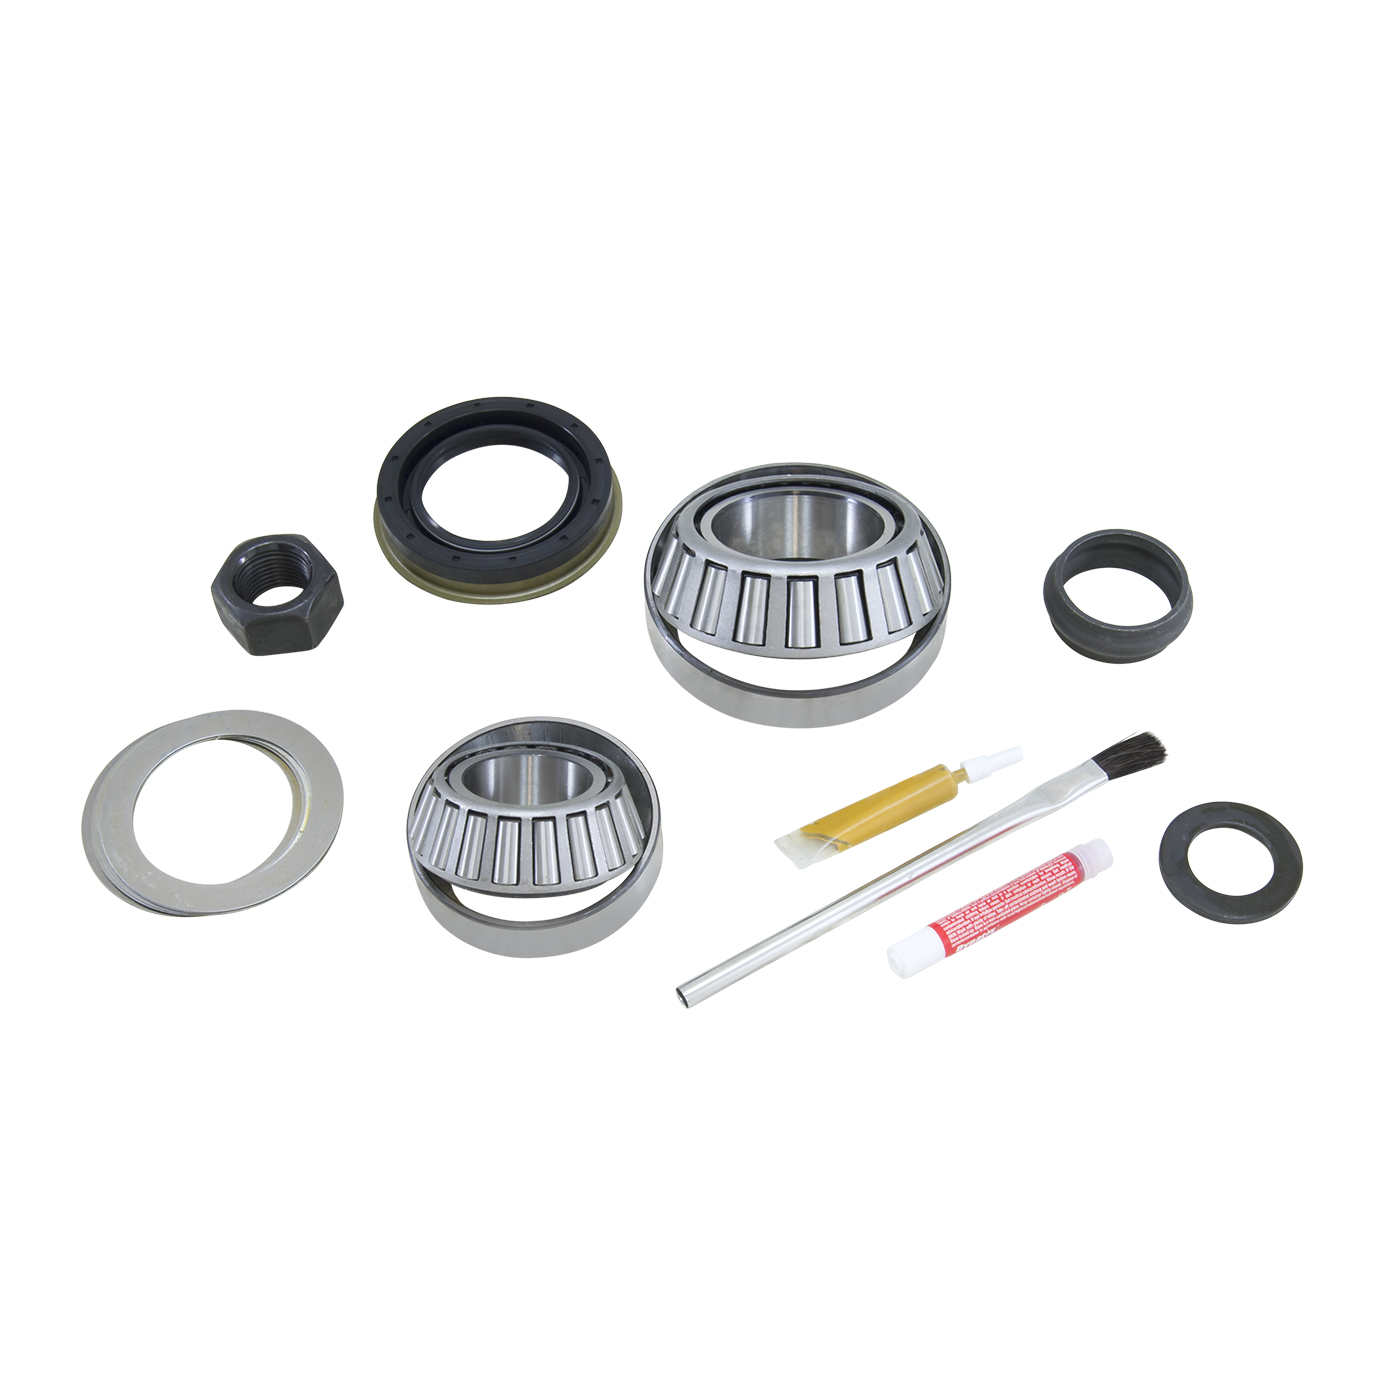 Pinion Install Kit For Dana 25 Differential